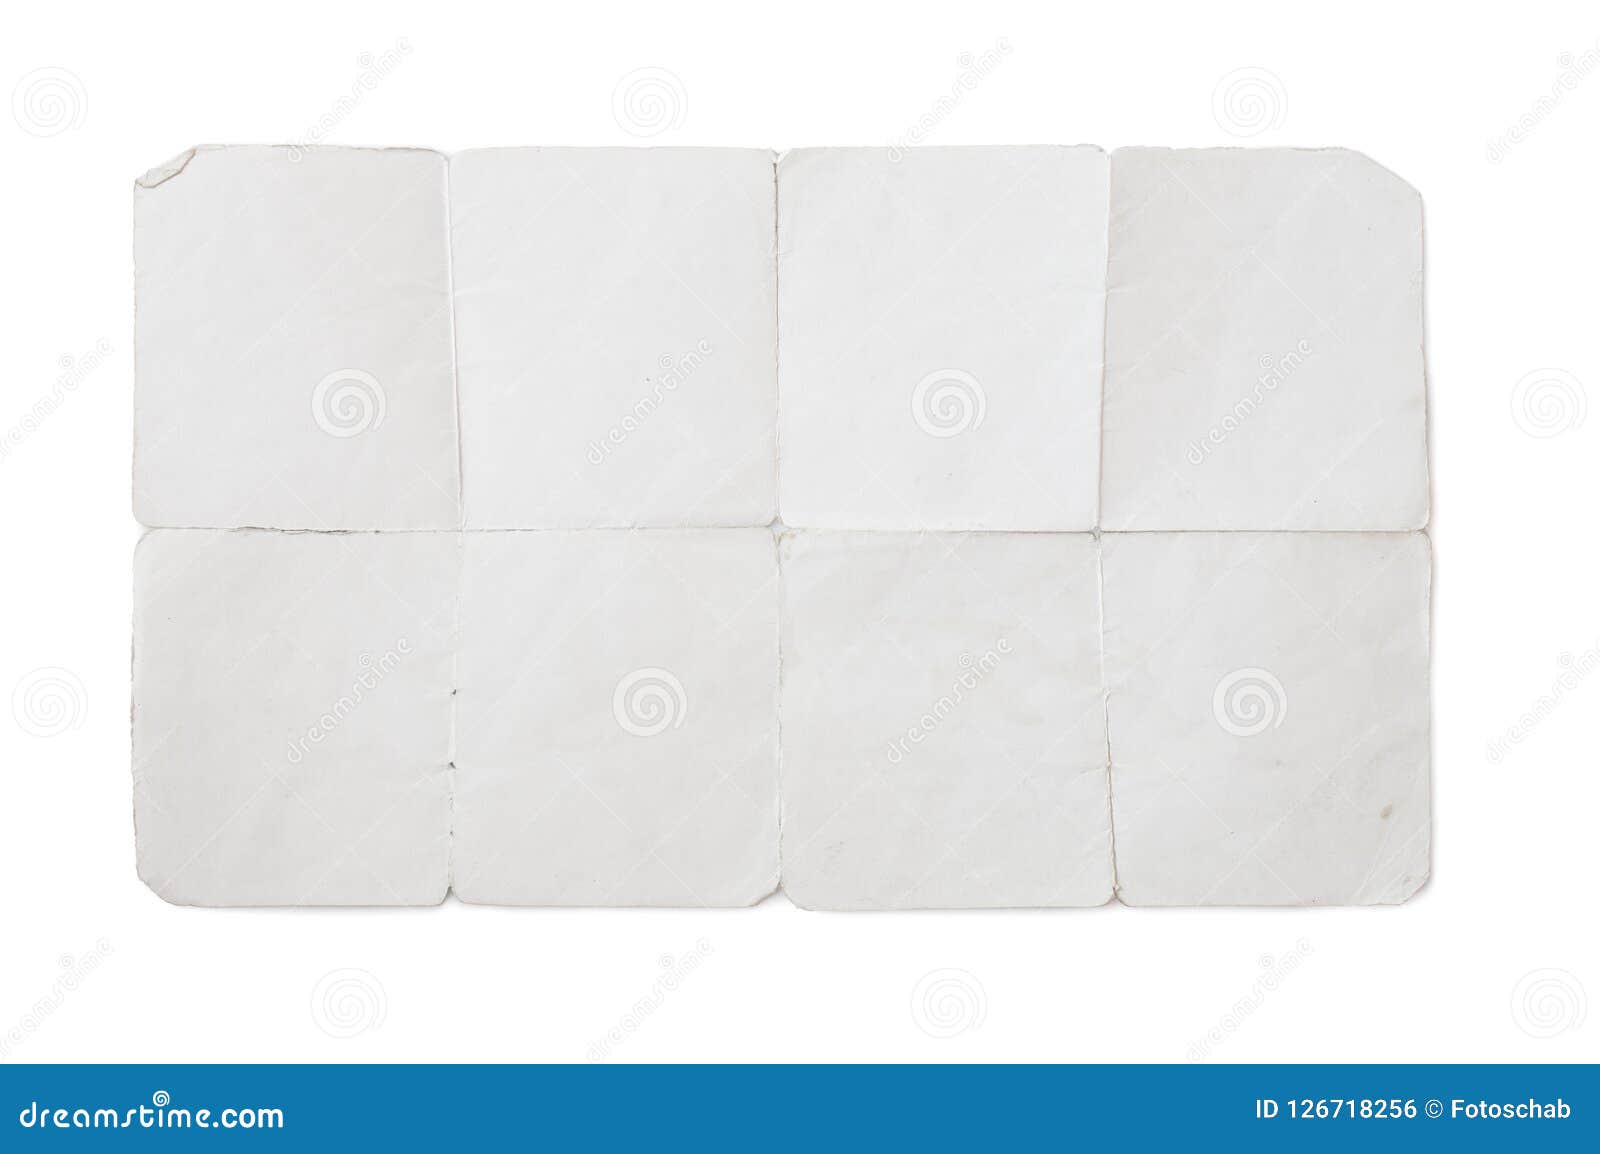 old folded paper with clipping path included